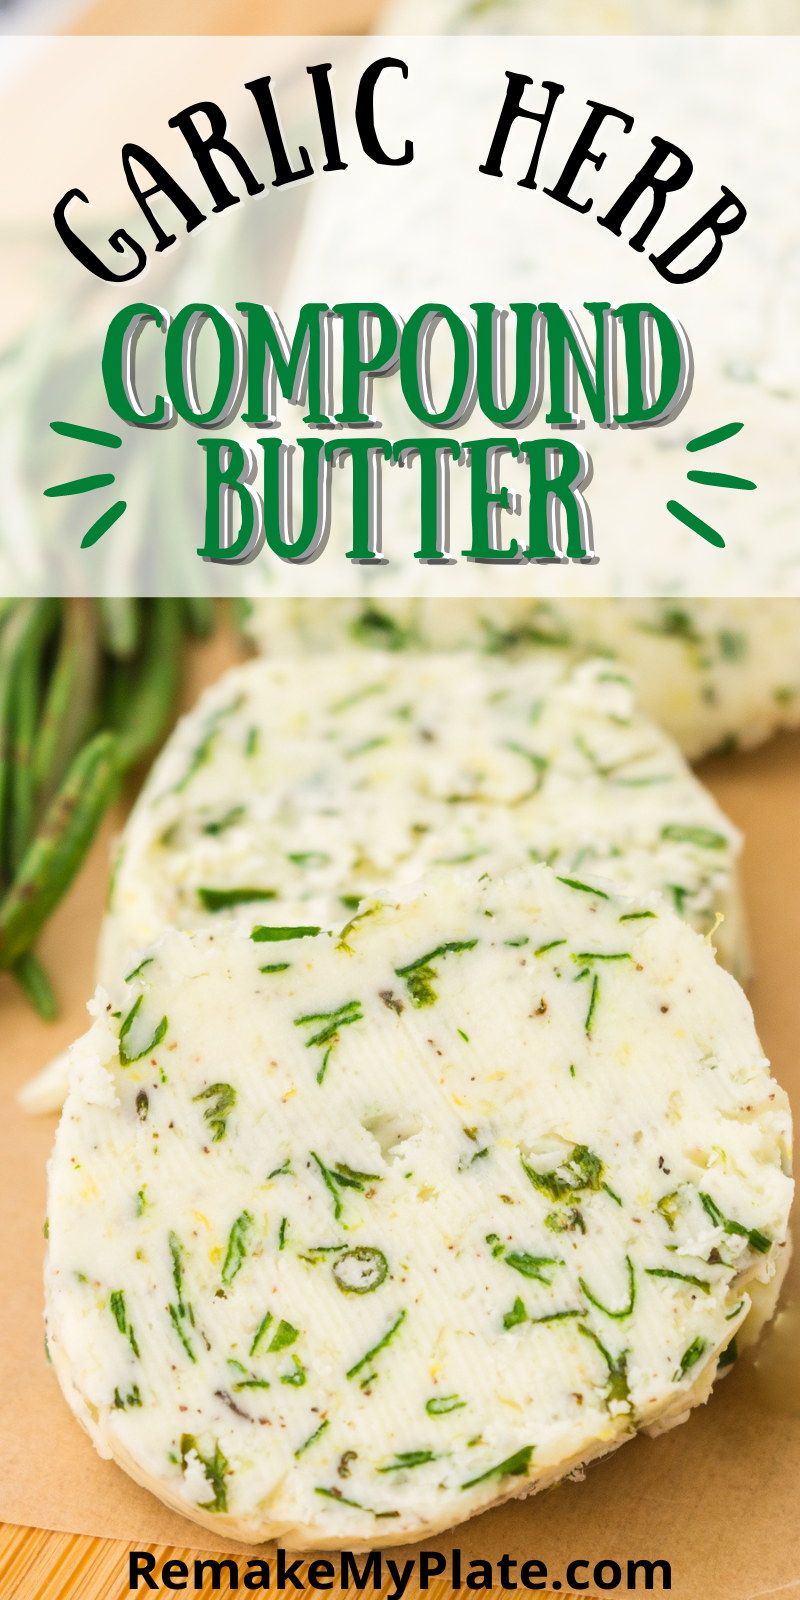 Easy Garlic Herb Butter Recipe - A Compound Butter - Grits and Pinecones